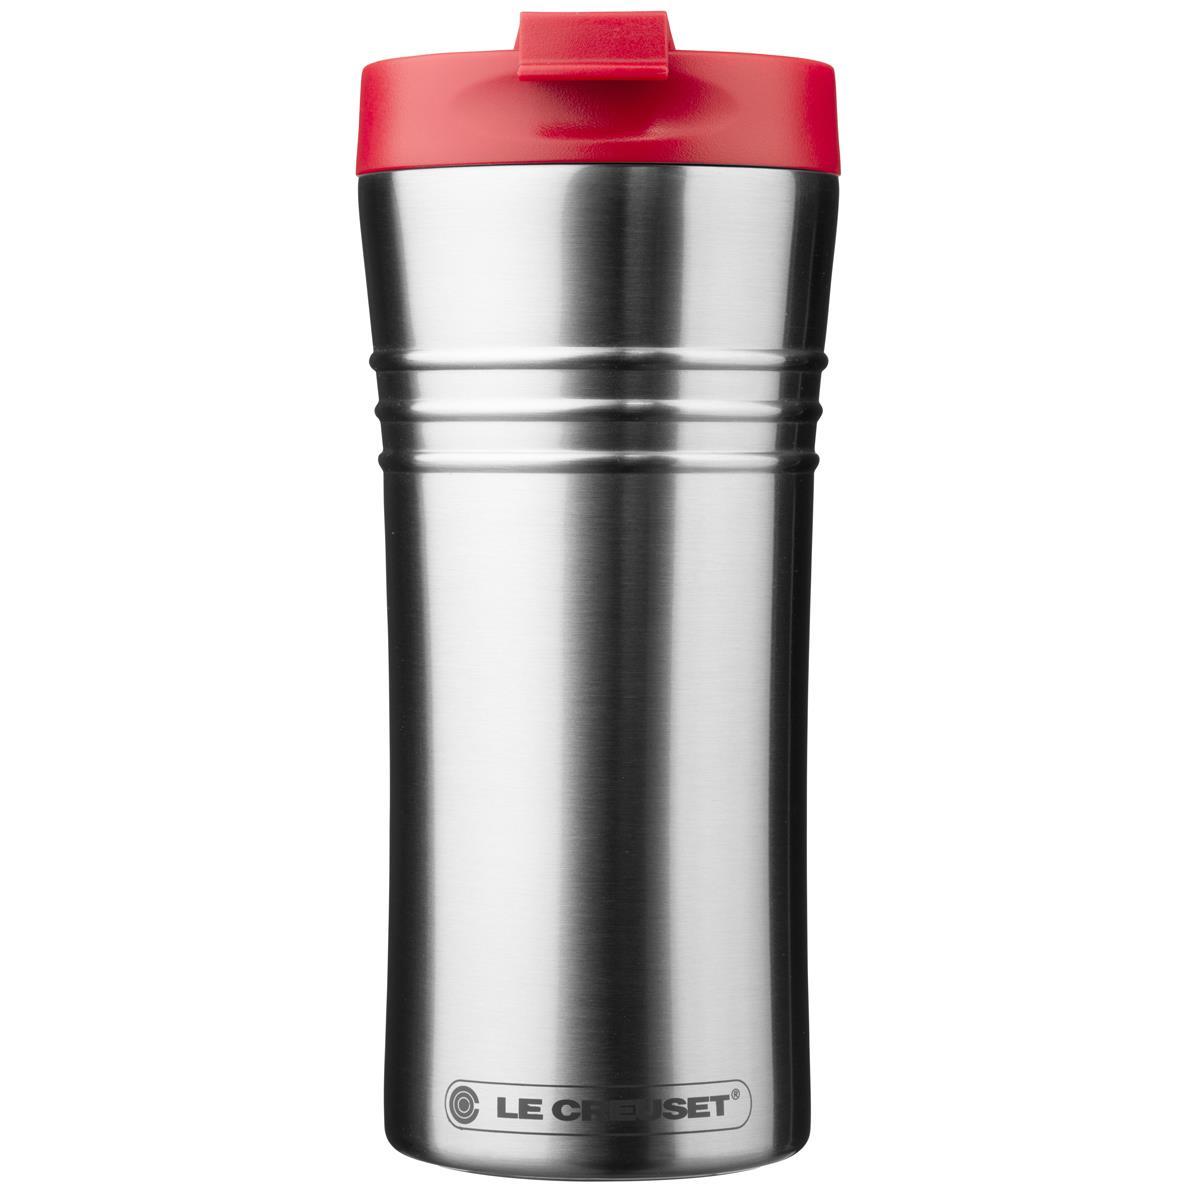 Le Creuset Stainless Steel Travel Mug Questions & Answers